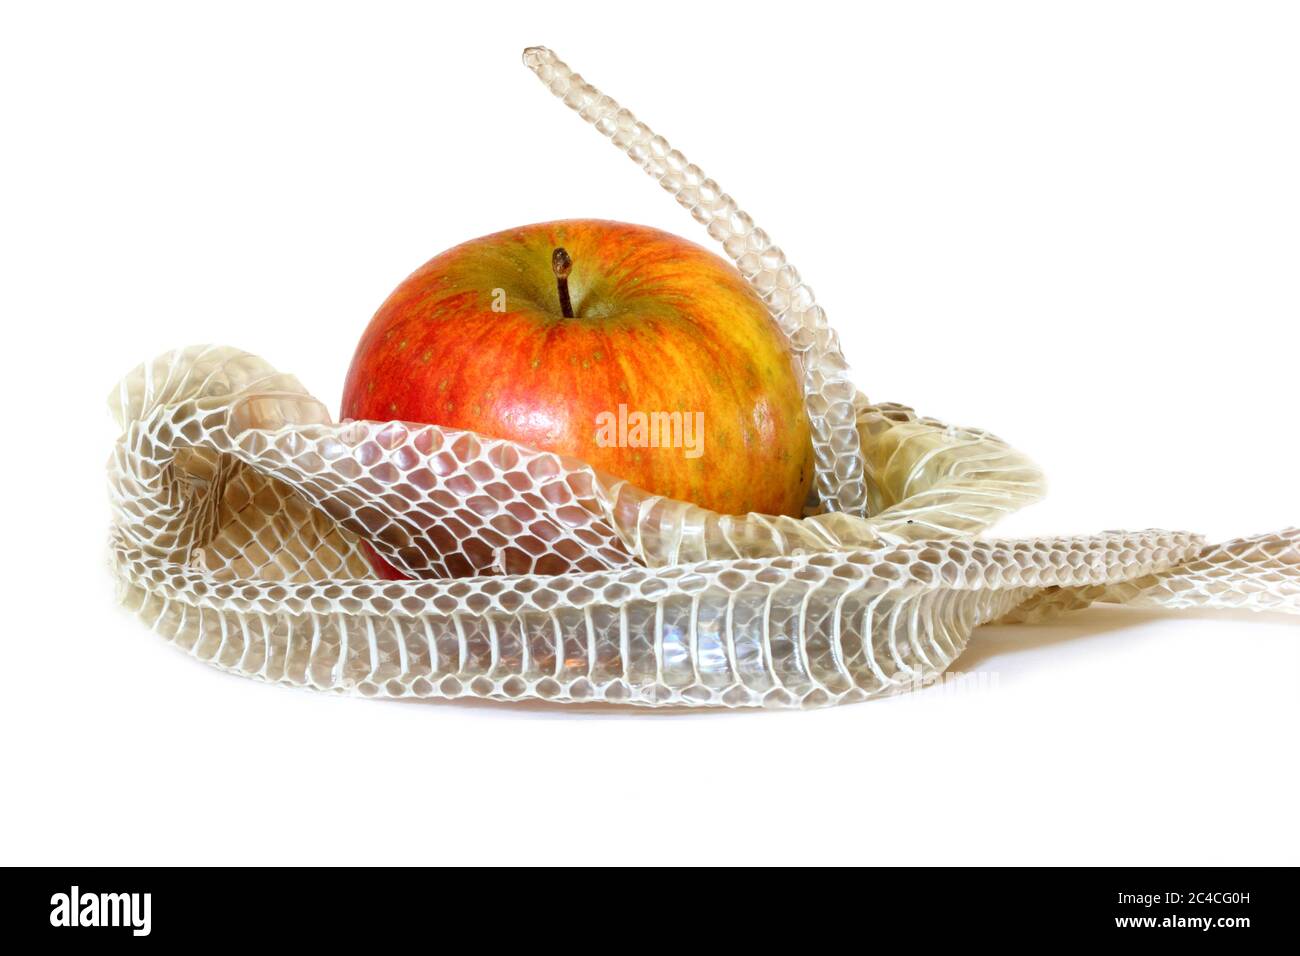 Snake skin wrapped around apple representing original sin by Adam and Eve in the Garden of Eden Stock Photo